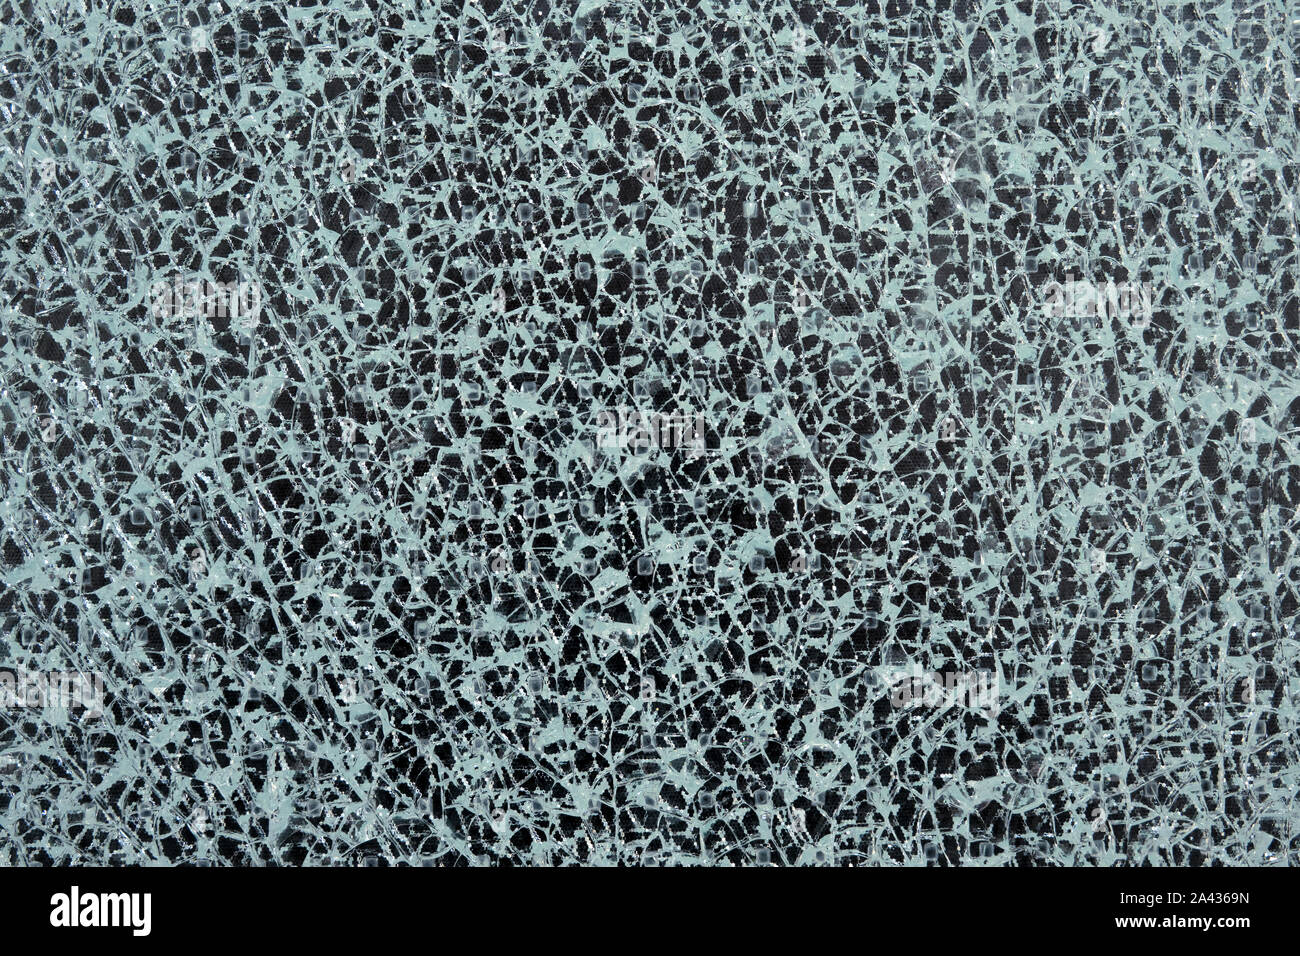 Abstract texture of a cracked glass pane Stock Photo